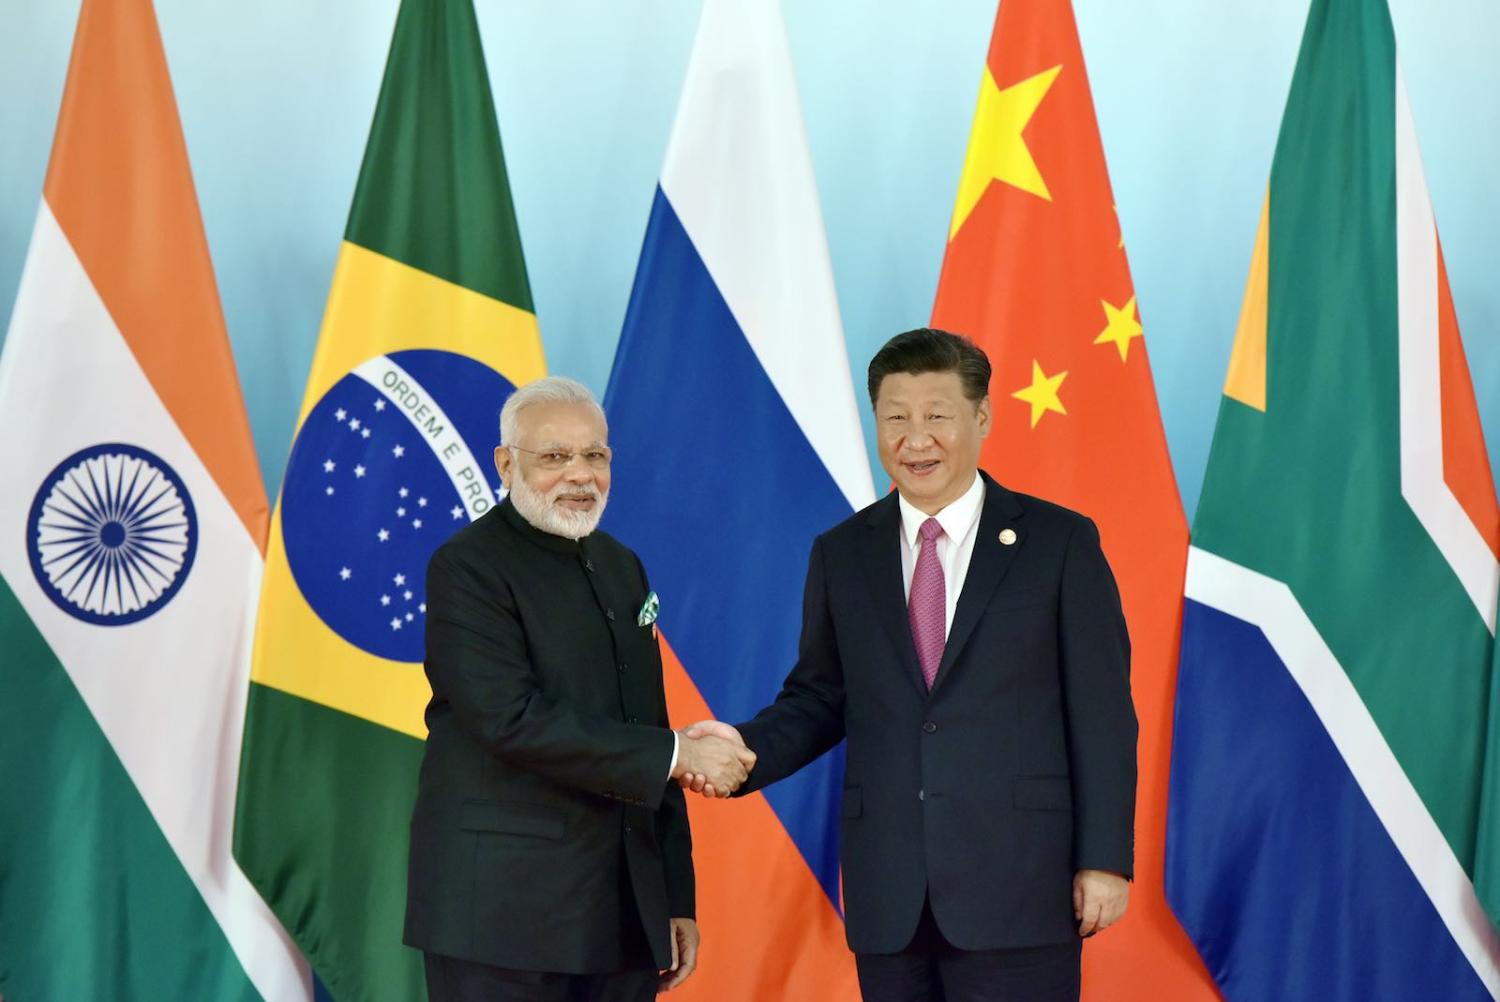 Brighter days: Narendra Modi and Xi Jinping at the 2017 BRICS summit in Xiamen, China (TPG/Getty Images) 